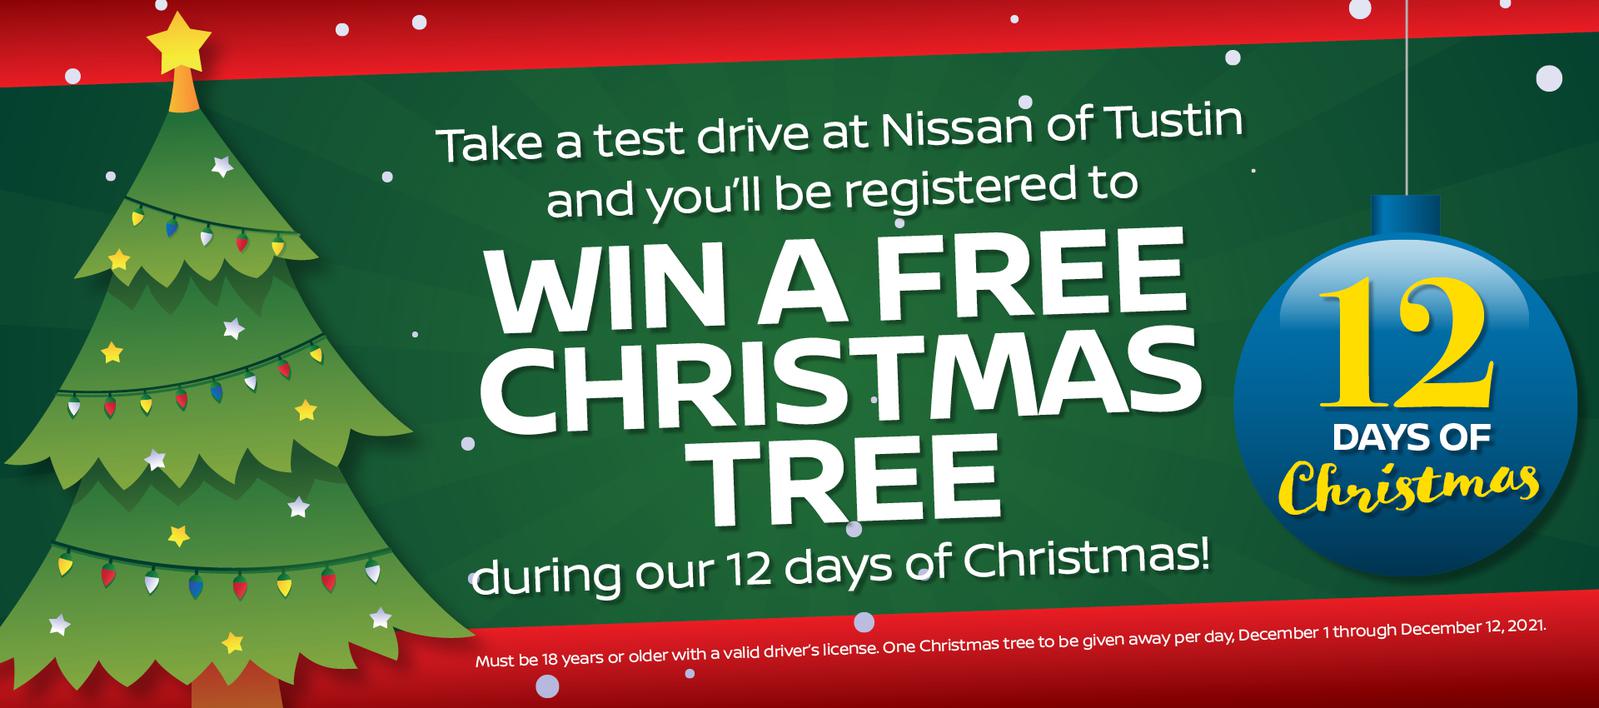 Take a test drive at Nissan of Tustin and you'll be registere to WIN A FREE CHRISTMAS TREE during our 12 days of Christmas!